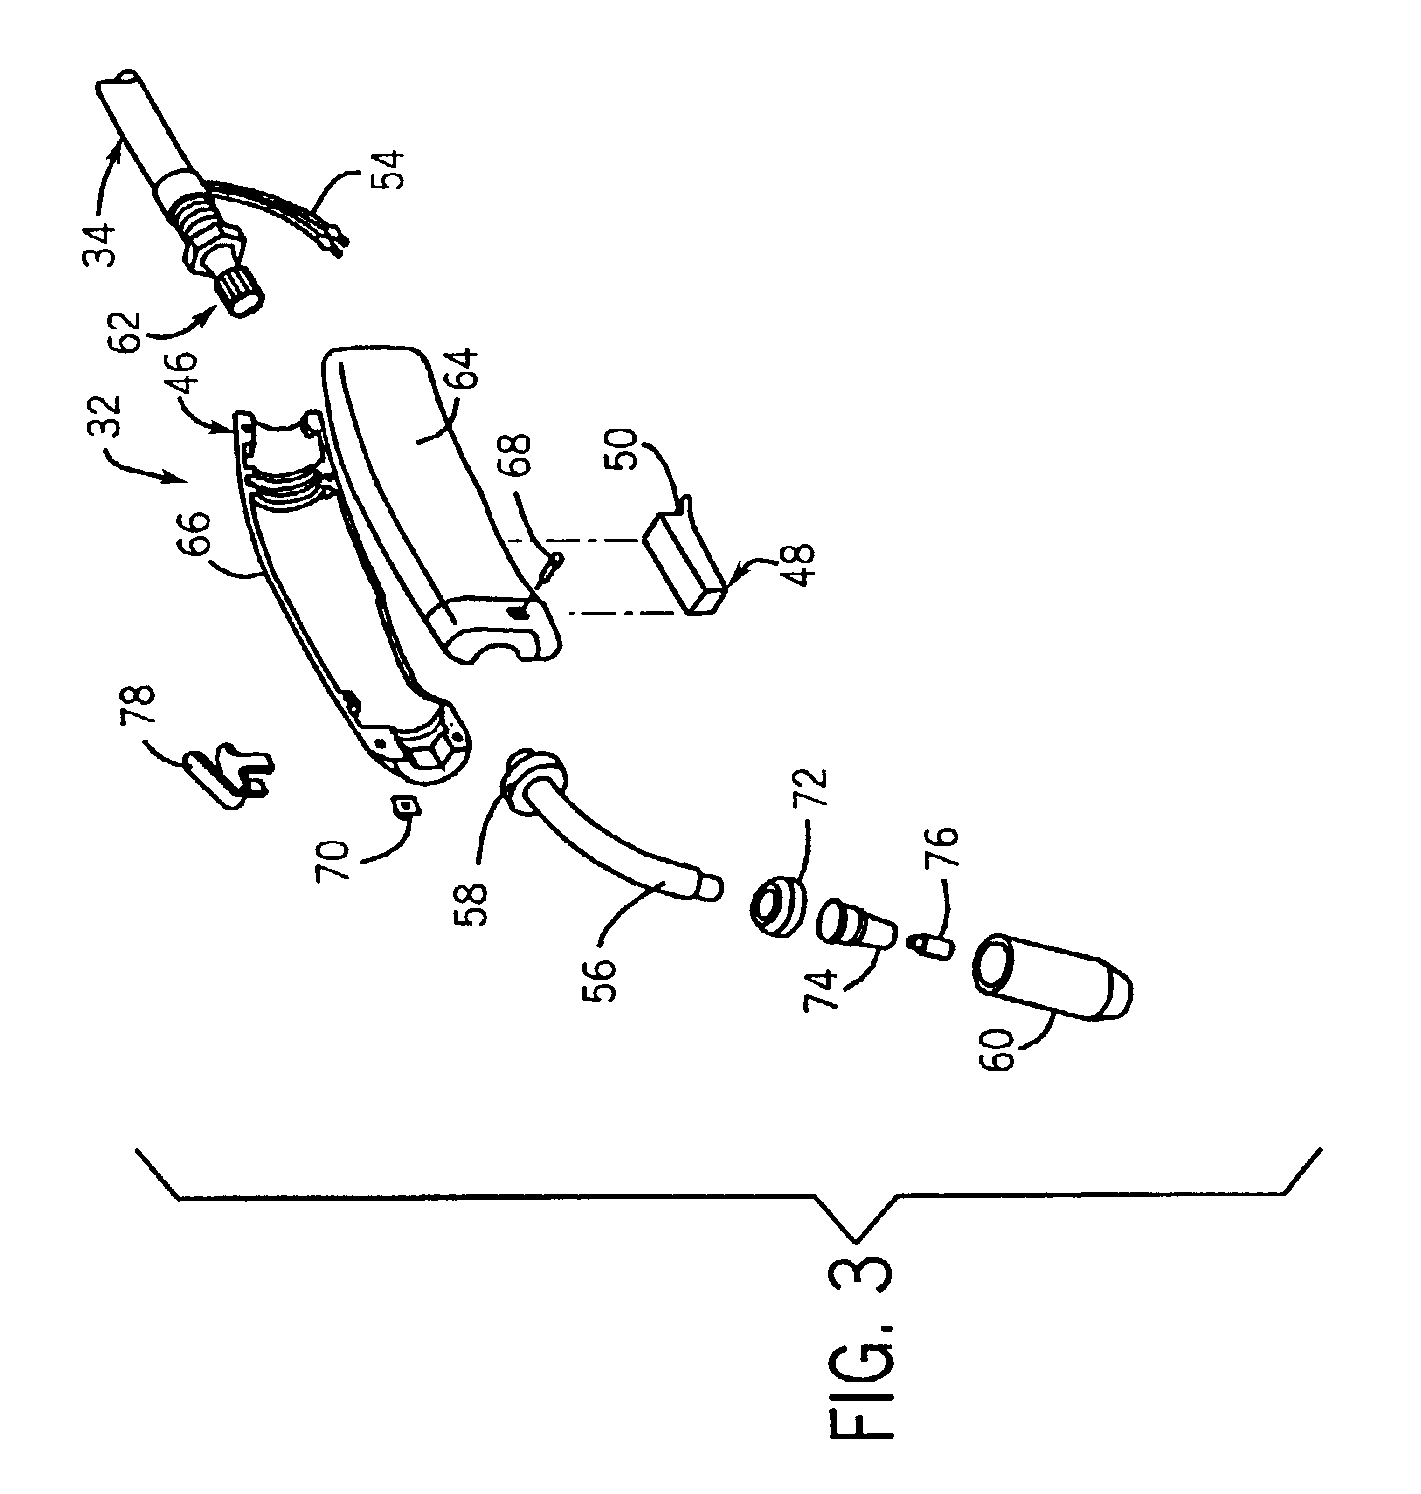 Self-contained locking trigger assembly and systems which incorporate the assembly